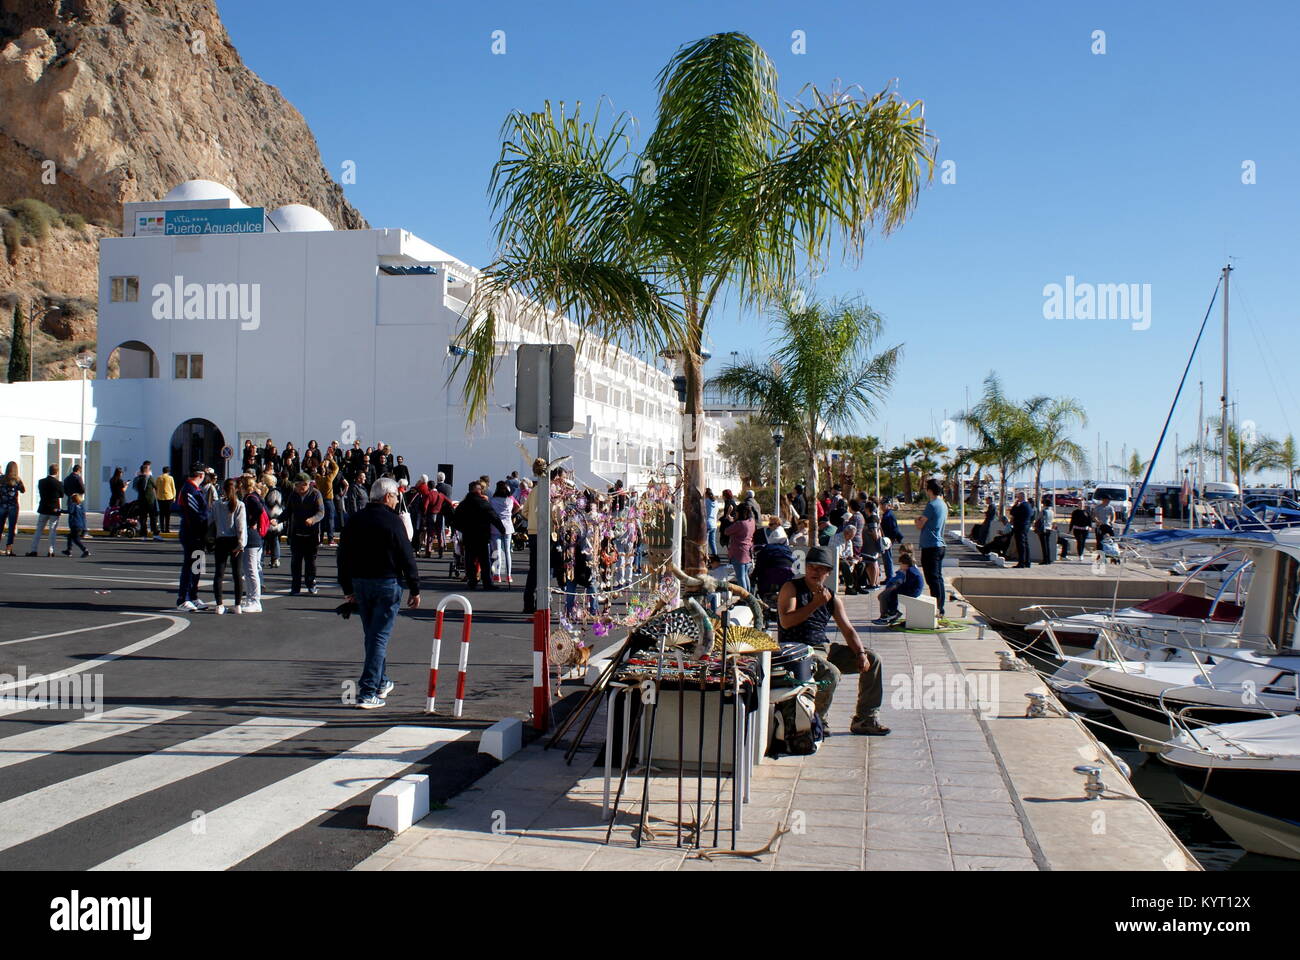 Aguadulce High Resolution Stock Photography and Images - Alamy